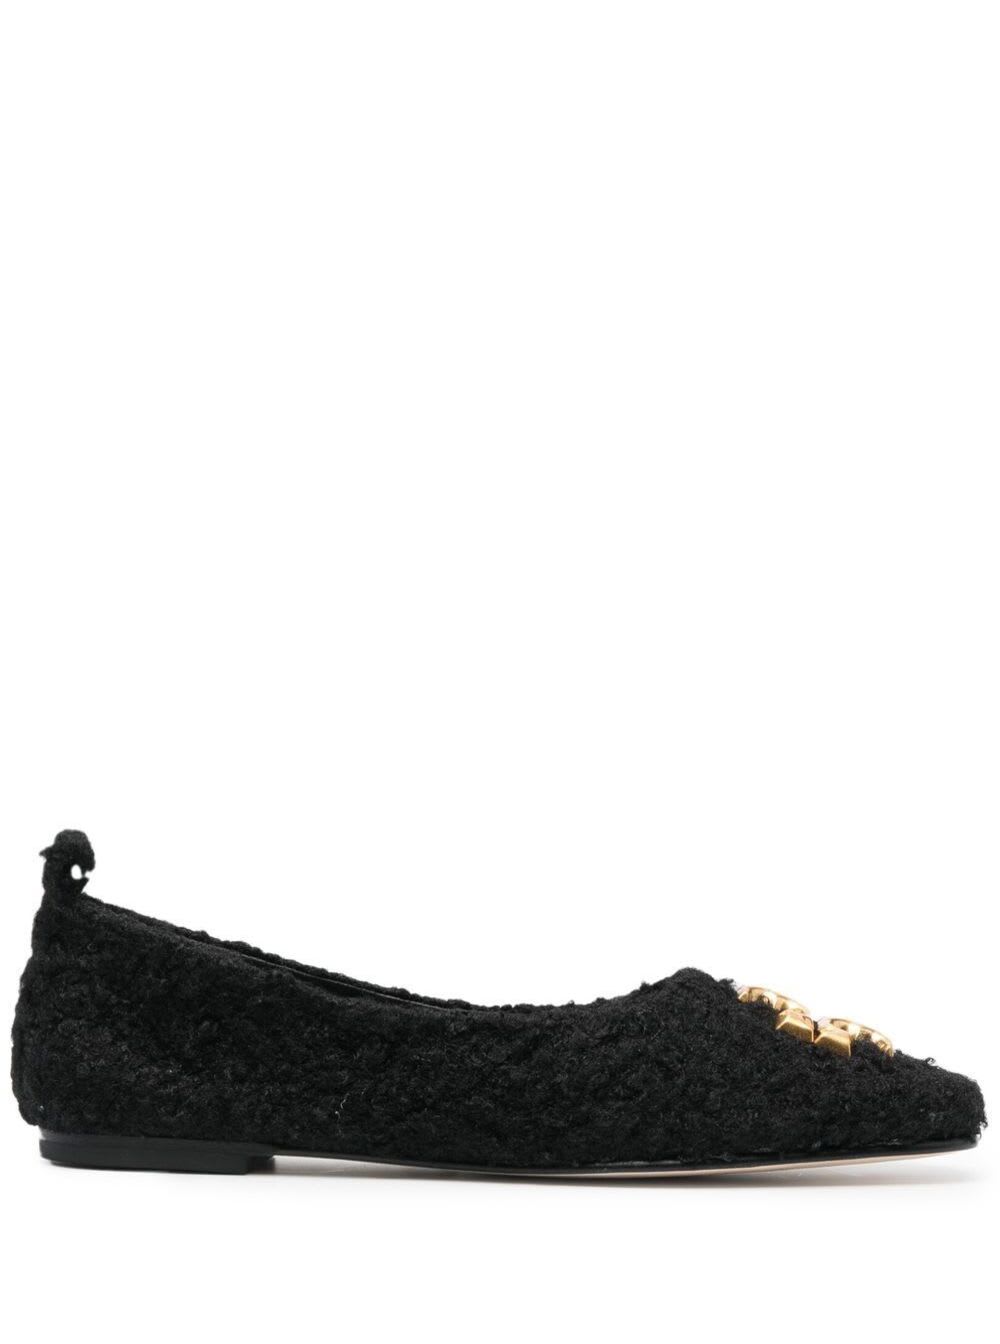 Tory Burch Eleonor Boucle Loafer